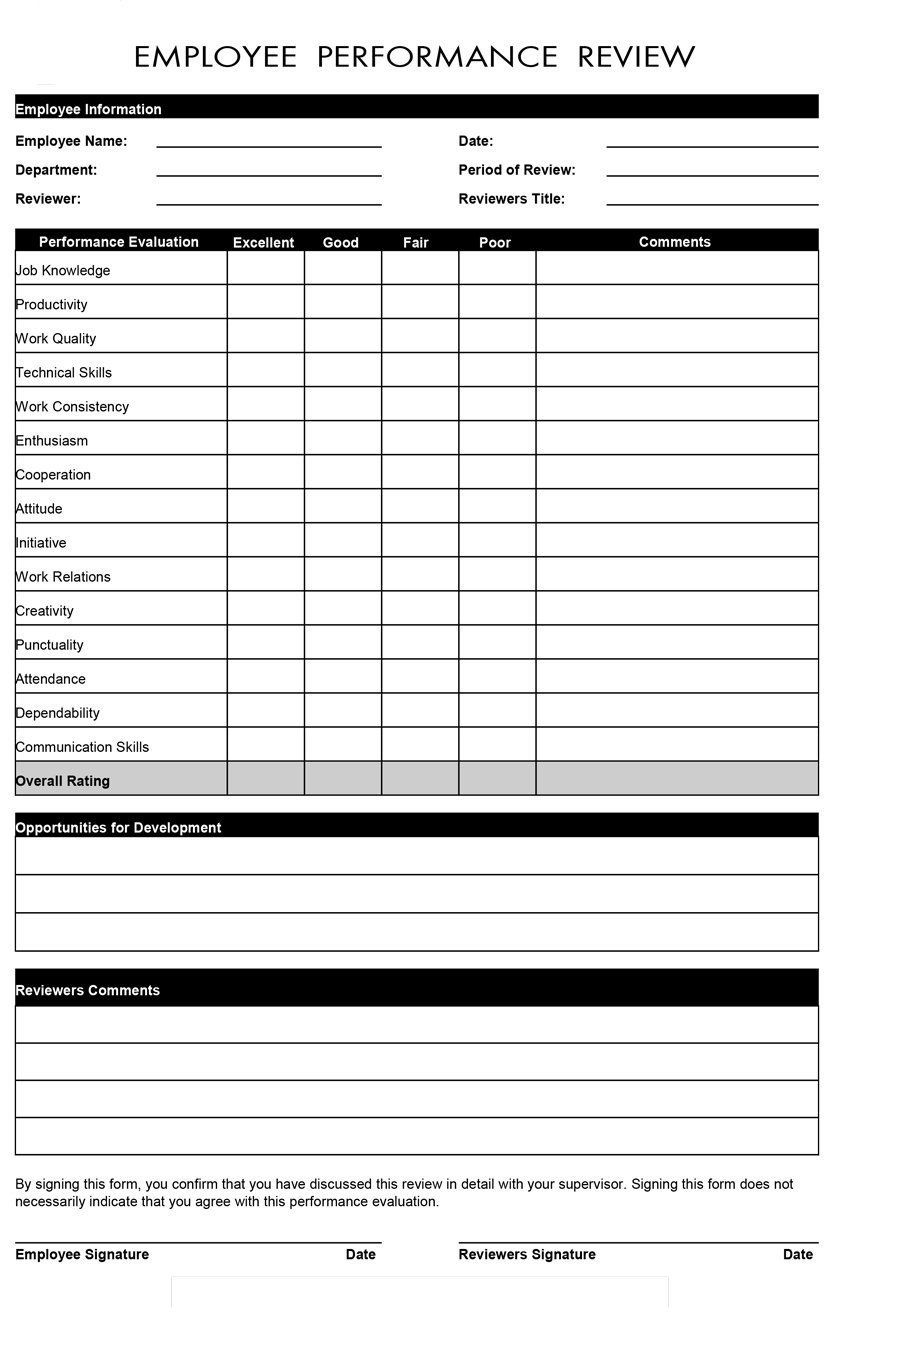 28 Employee Review Form Template Free In 2020 With Images